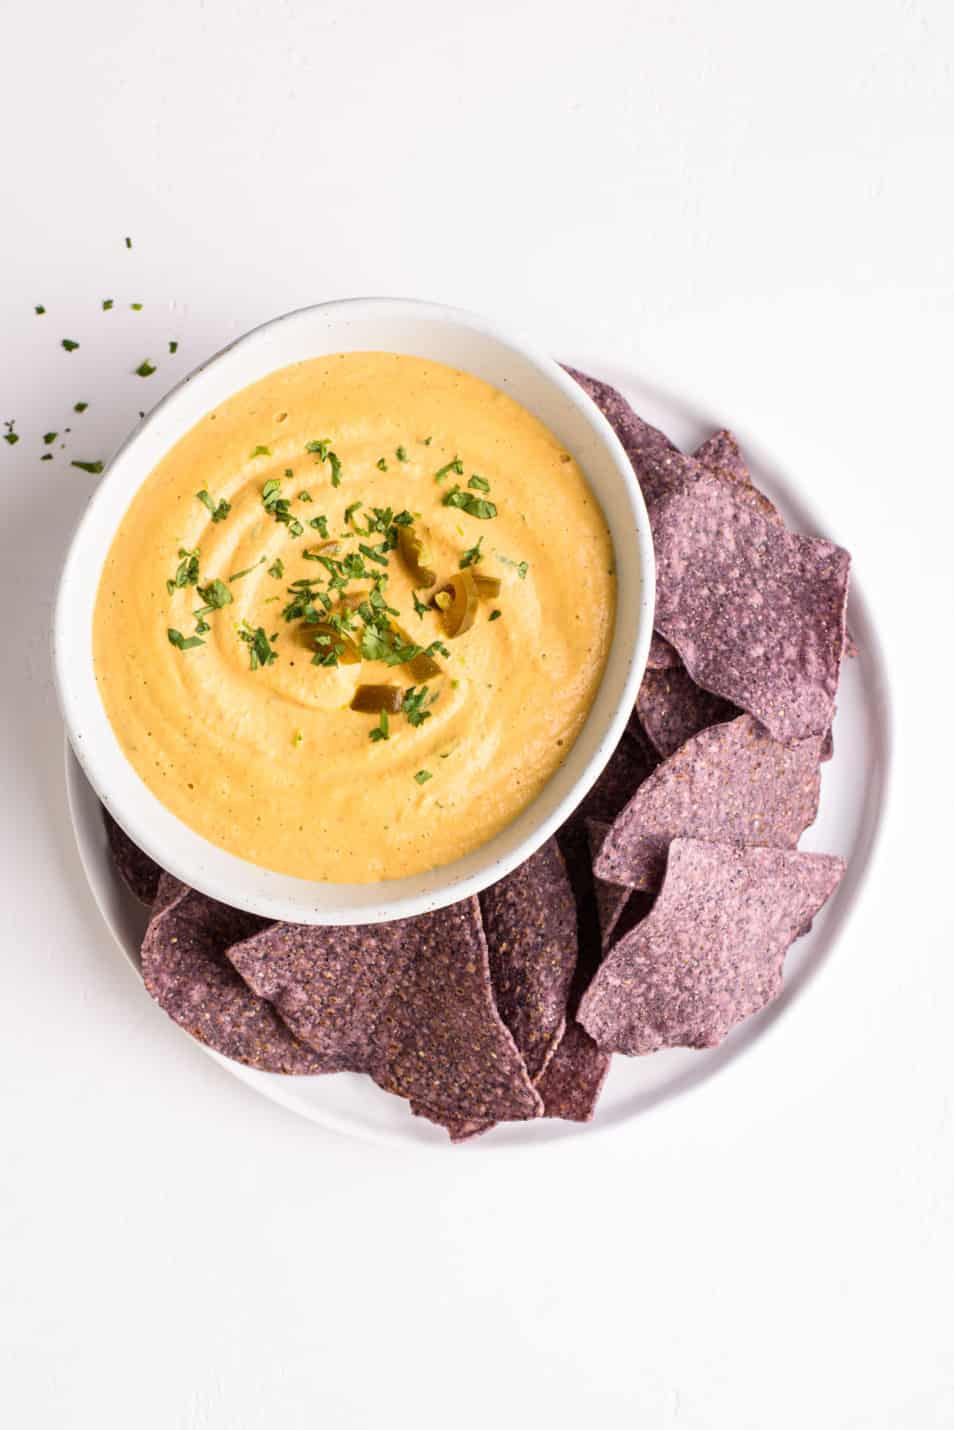 Vegan nacho cheese sauce in a bowl on a plate with blue corn tortilla chips